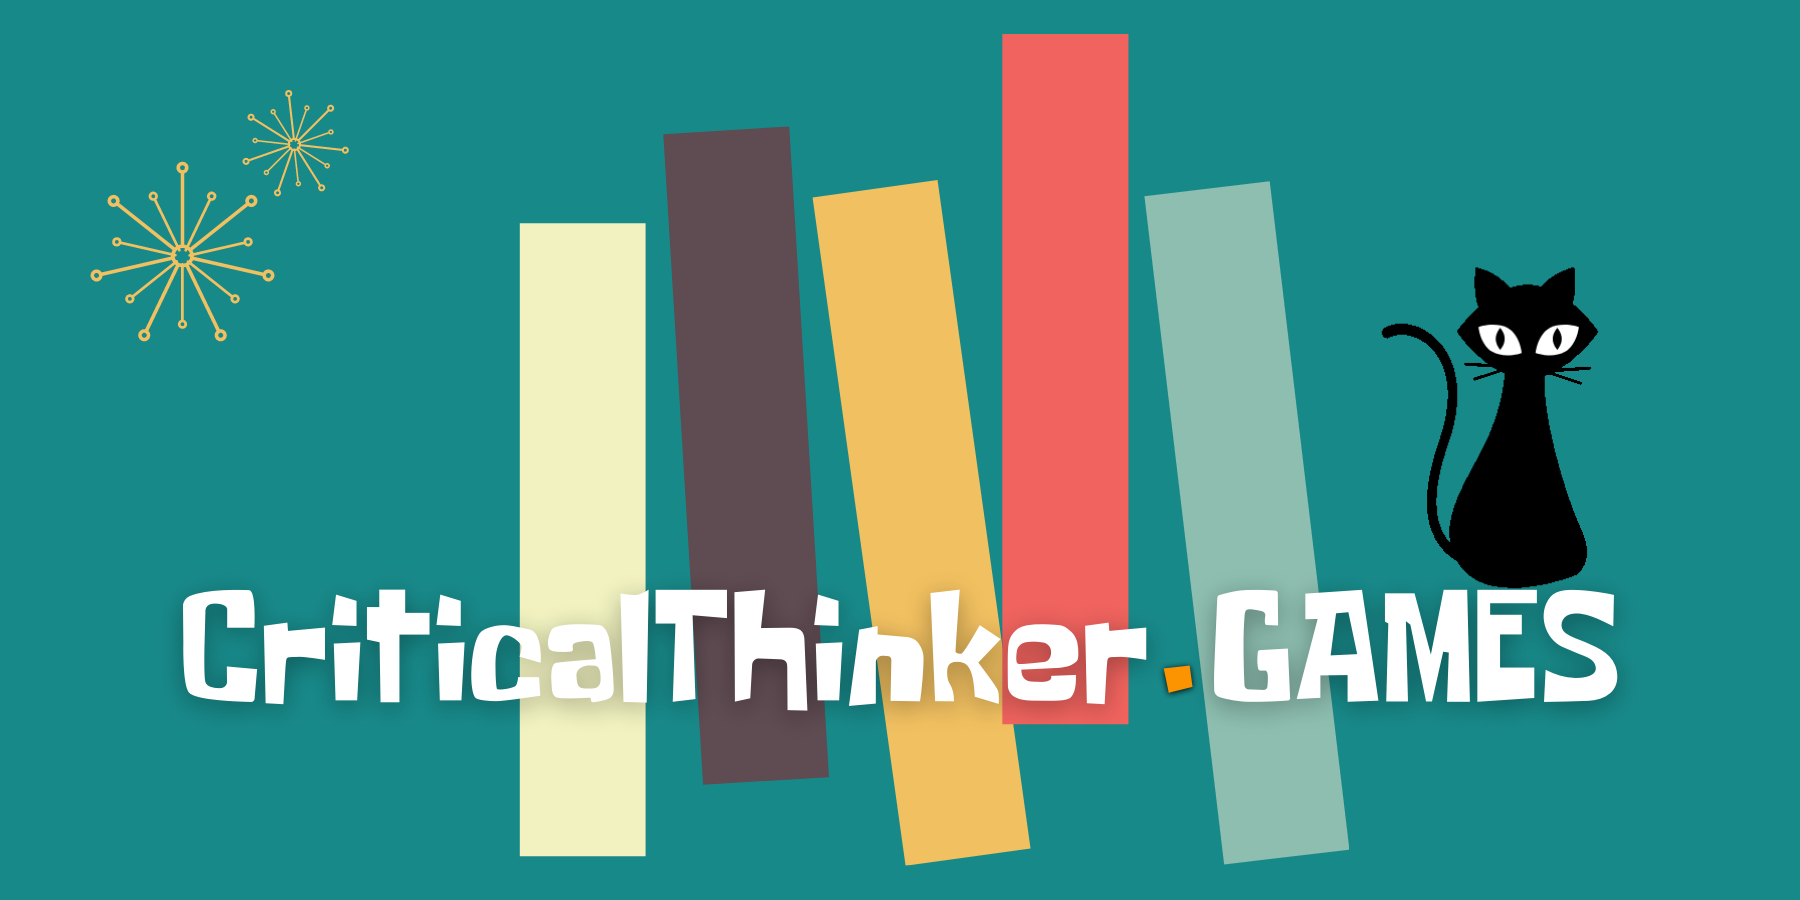 Logo for the Critical Thinking Game Design Challenge. The critical thinking cat is perched on top of the CriticalThinker.games URL